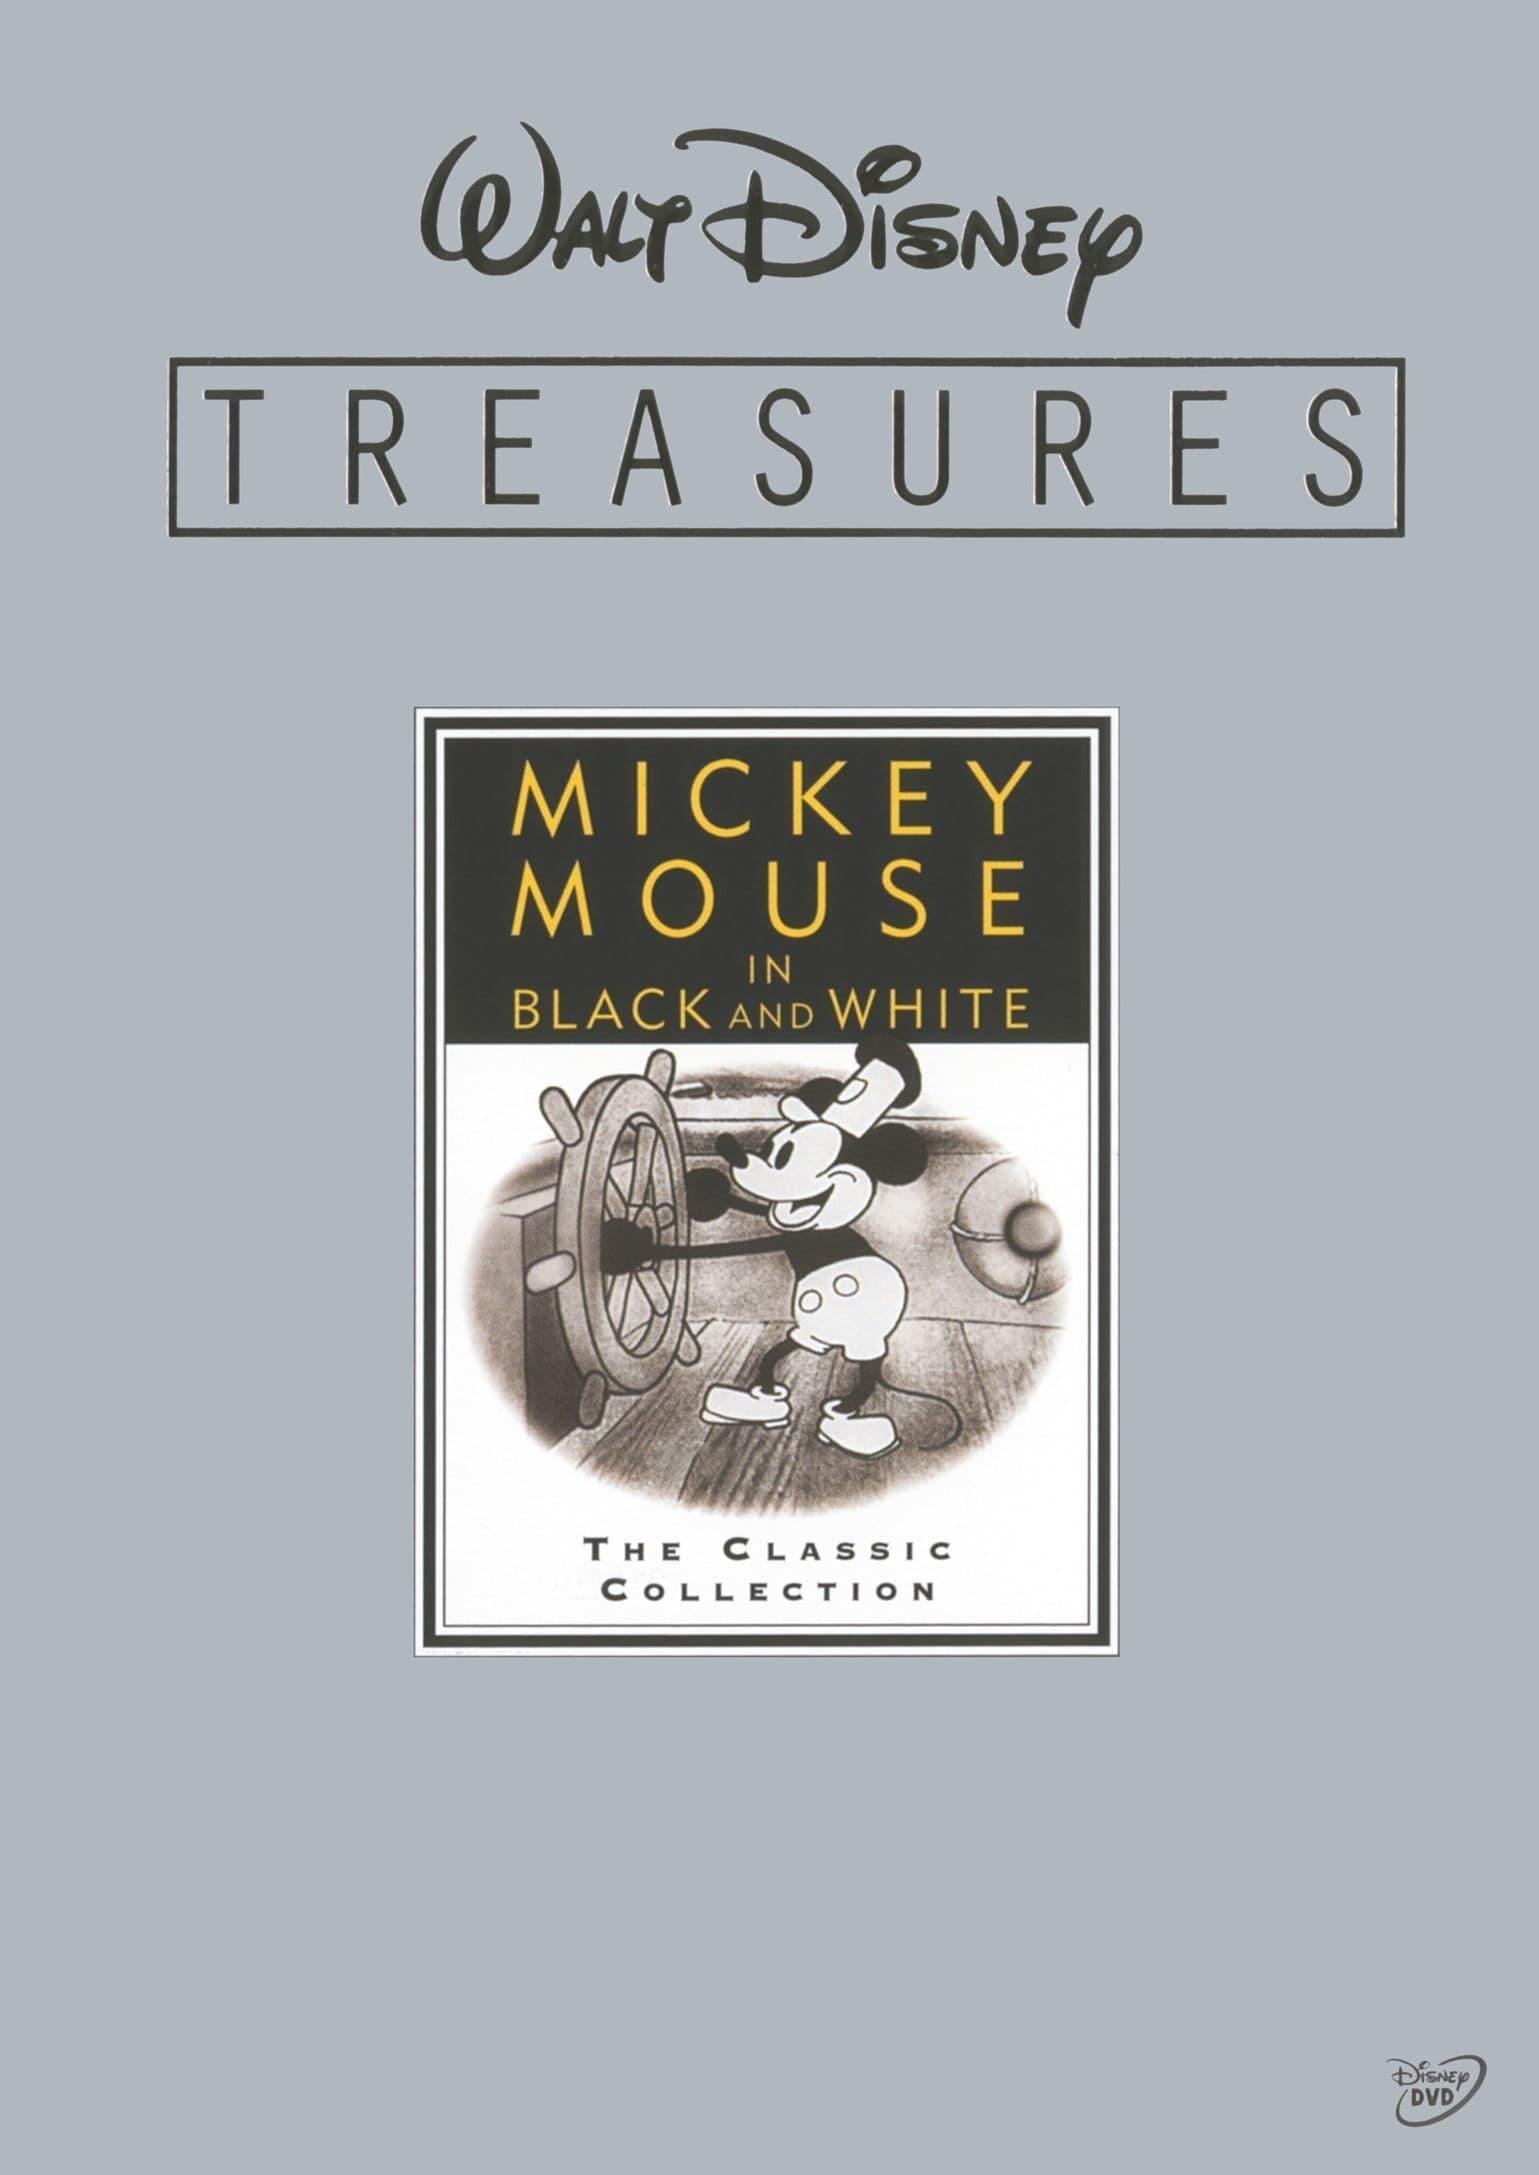 Walt Disney Treasures - Mickey Mouse in Black and White poster